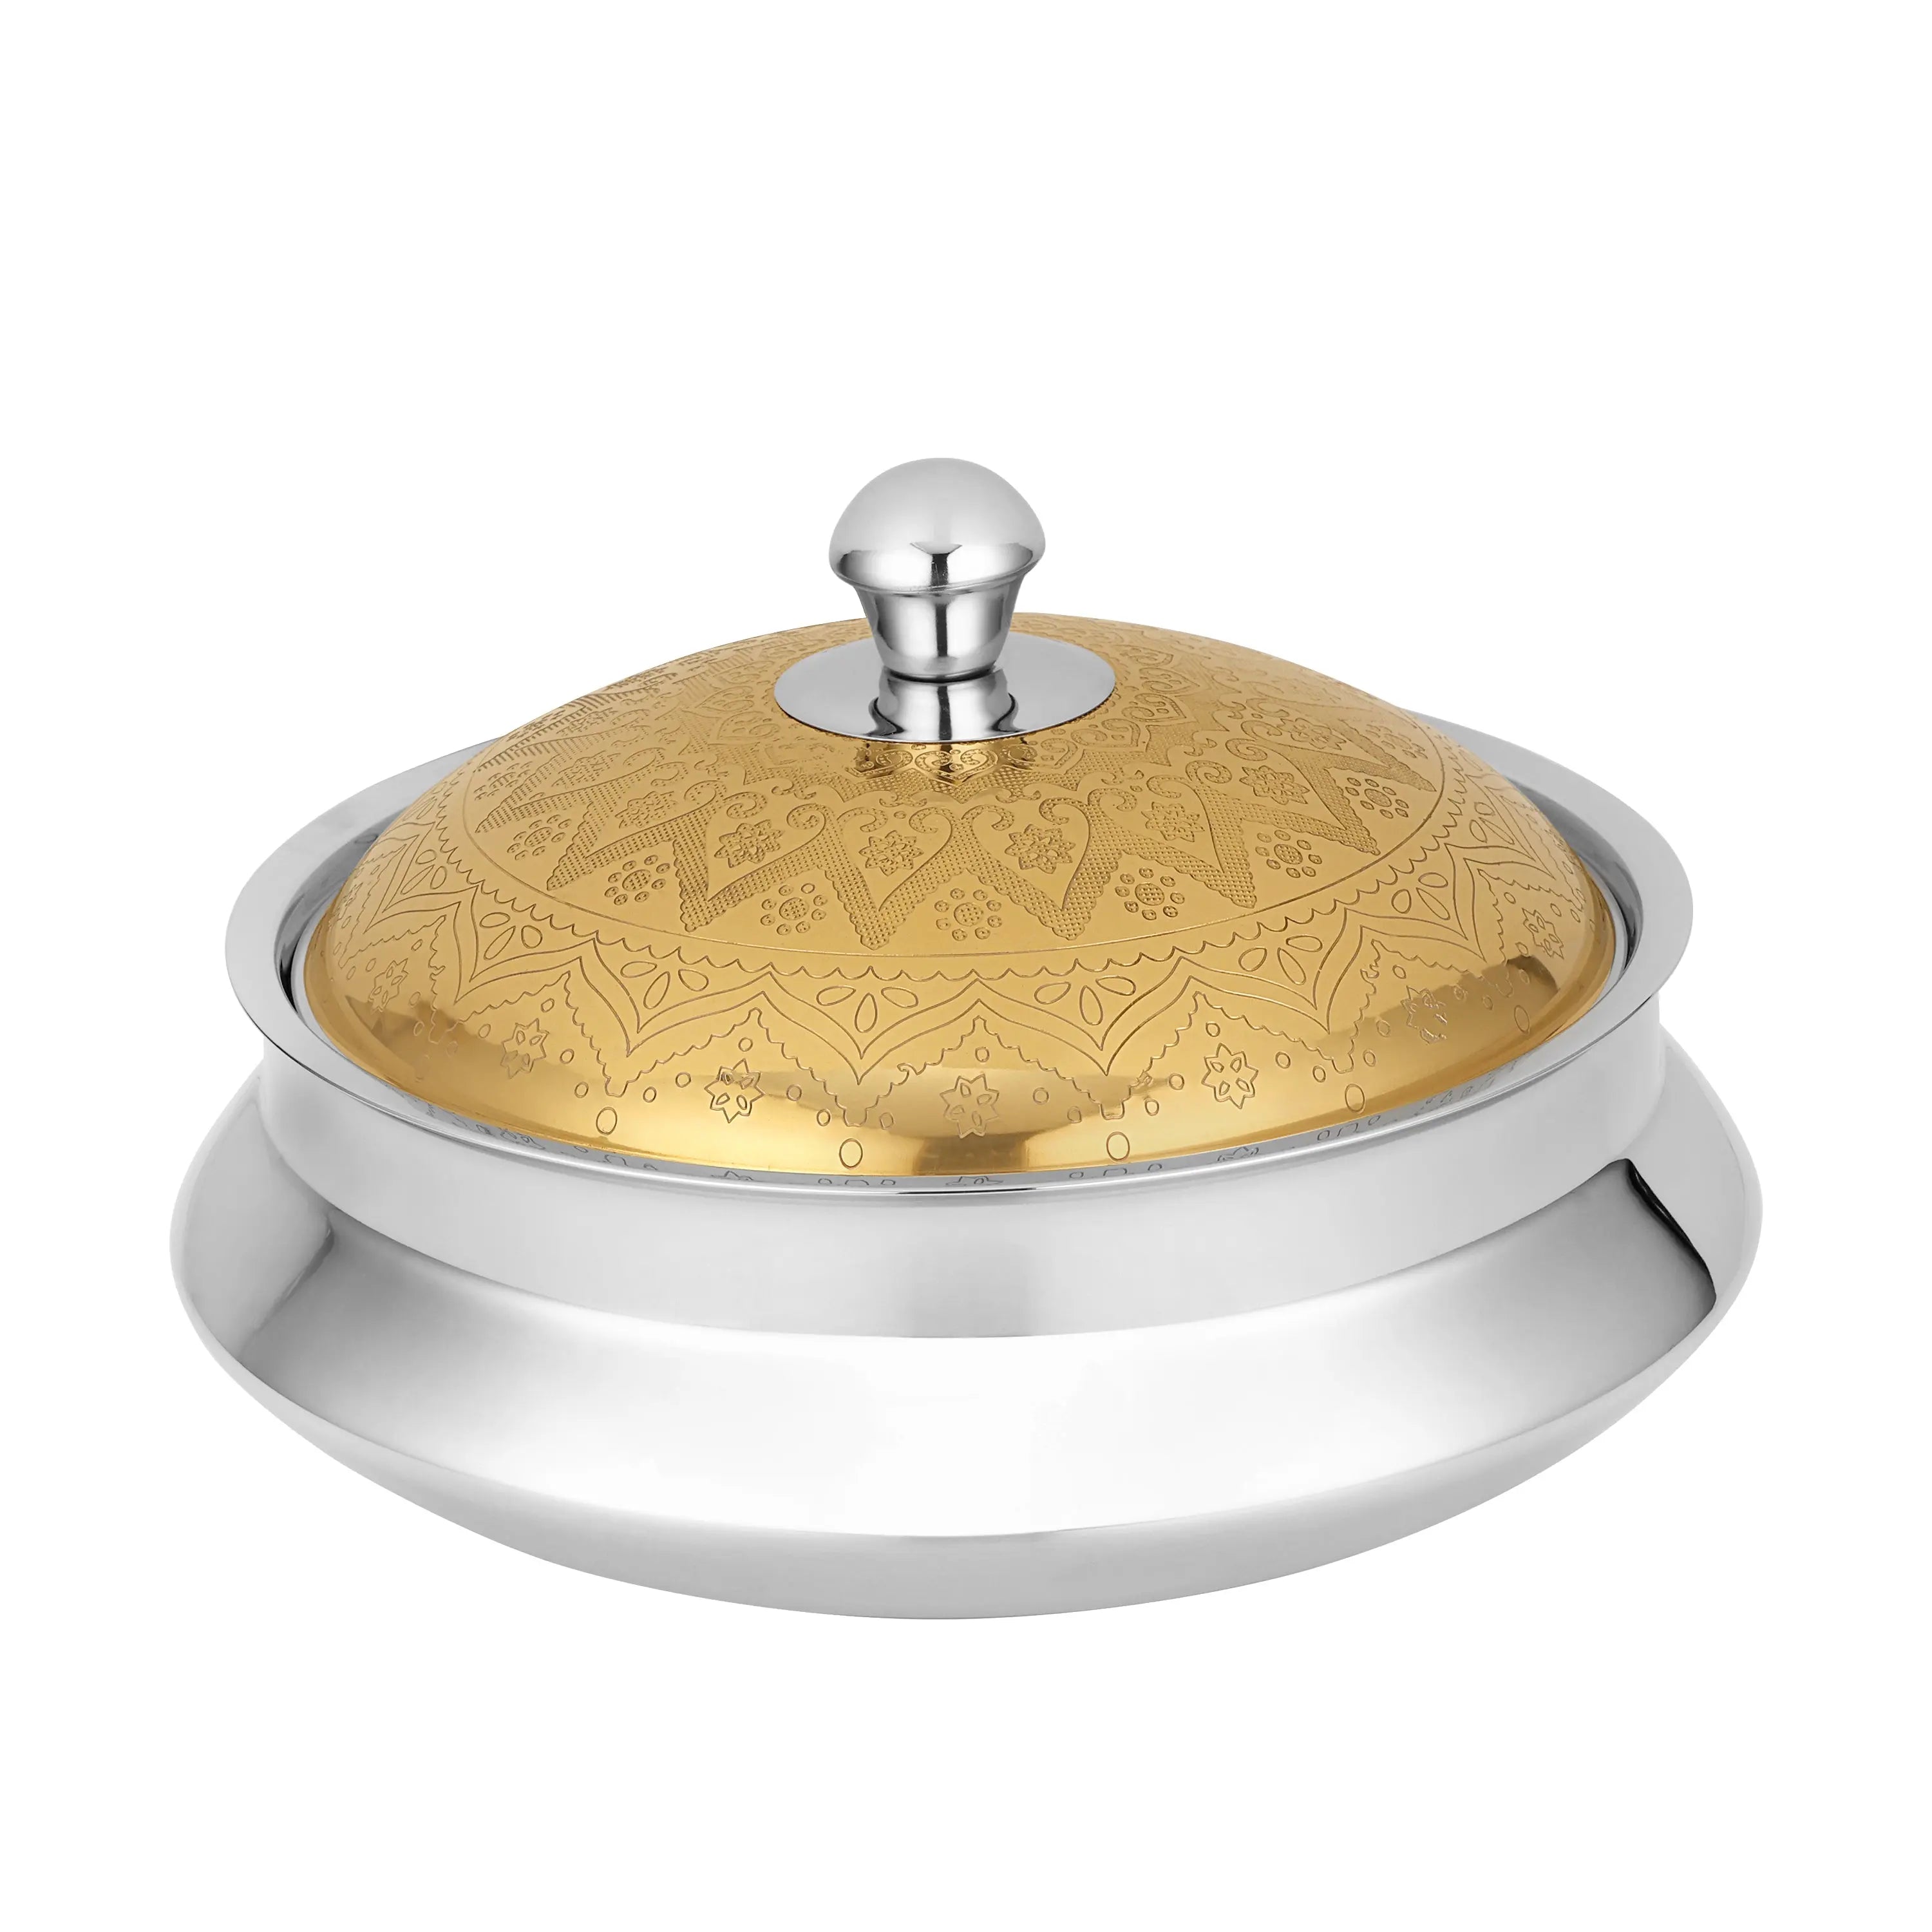 STAINLESS STEEL CASSEROLE MILANO GOLD ETCHING - CROCKERY WALA AND COMPANY 